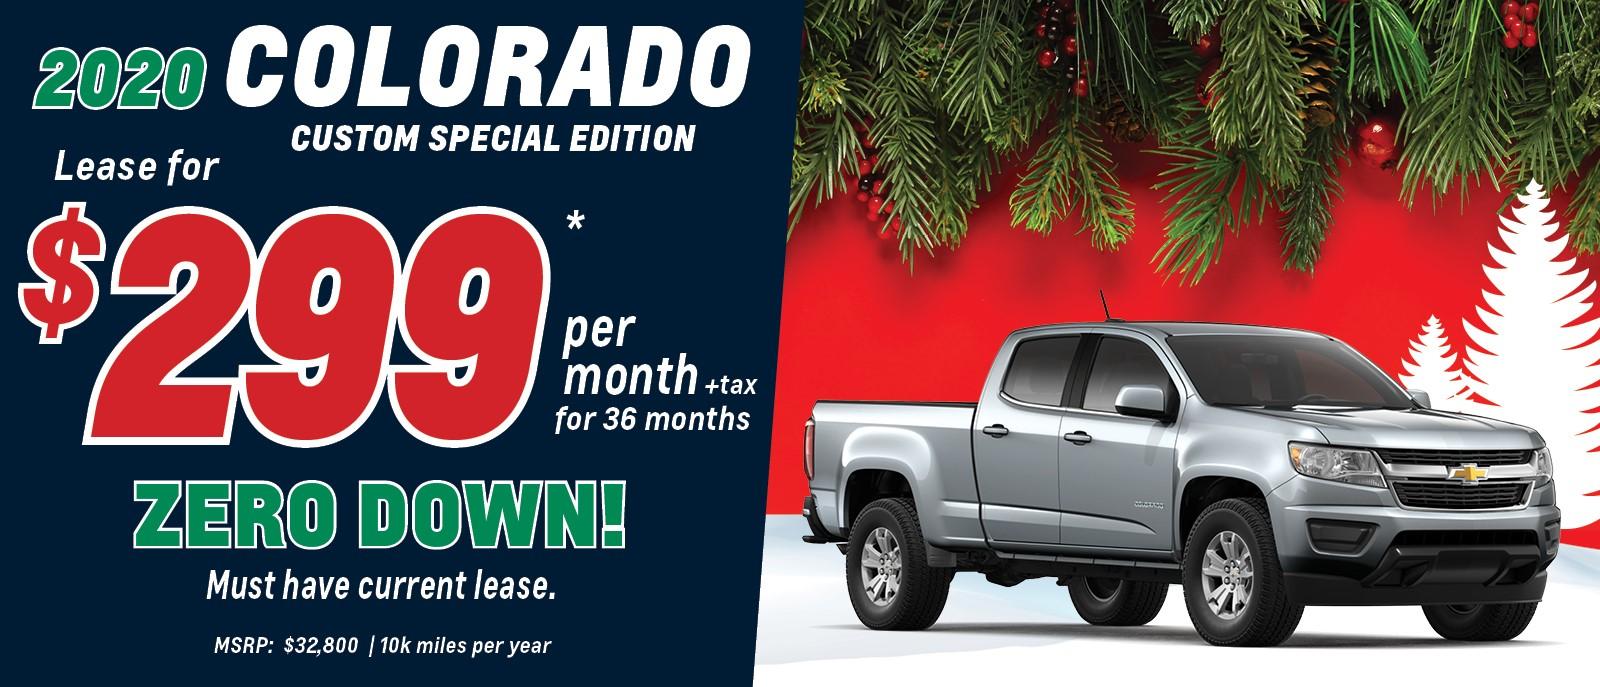 LEASE THE 2020 COLORADO FOR ONLY $299 PER MONTH!